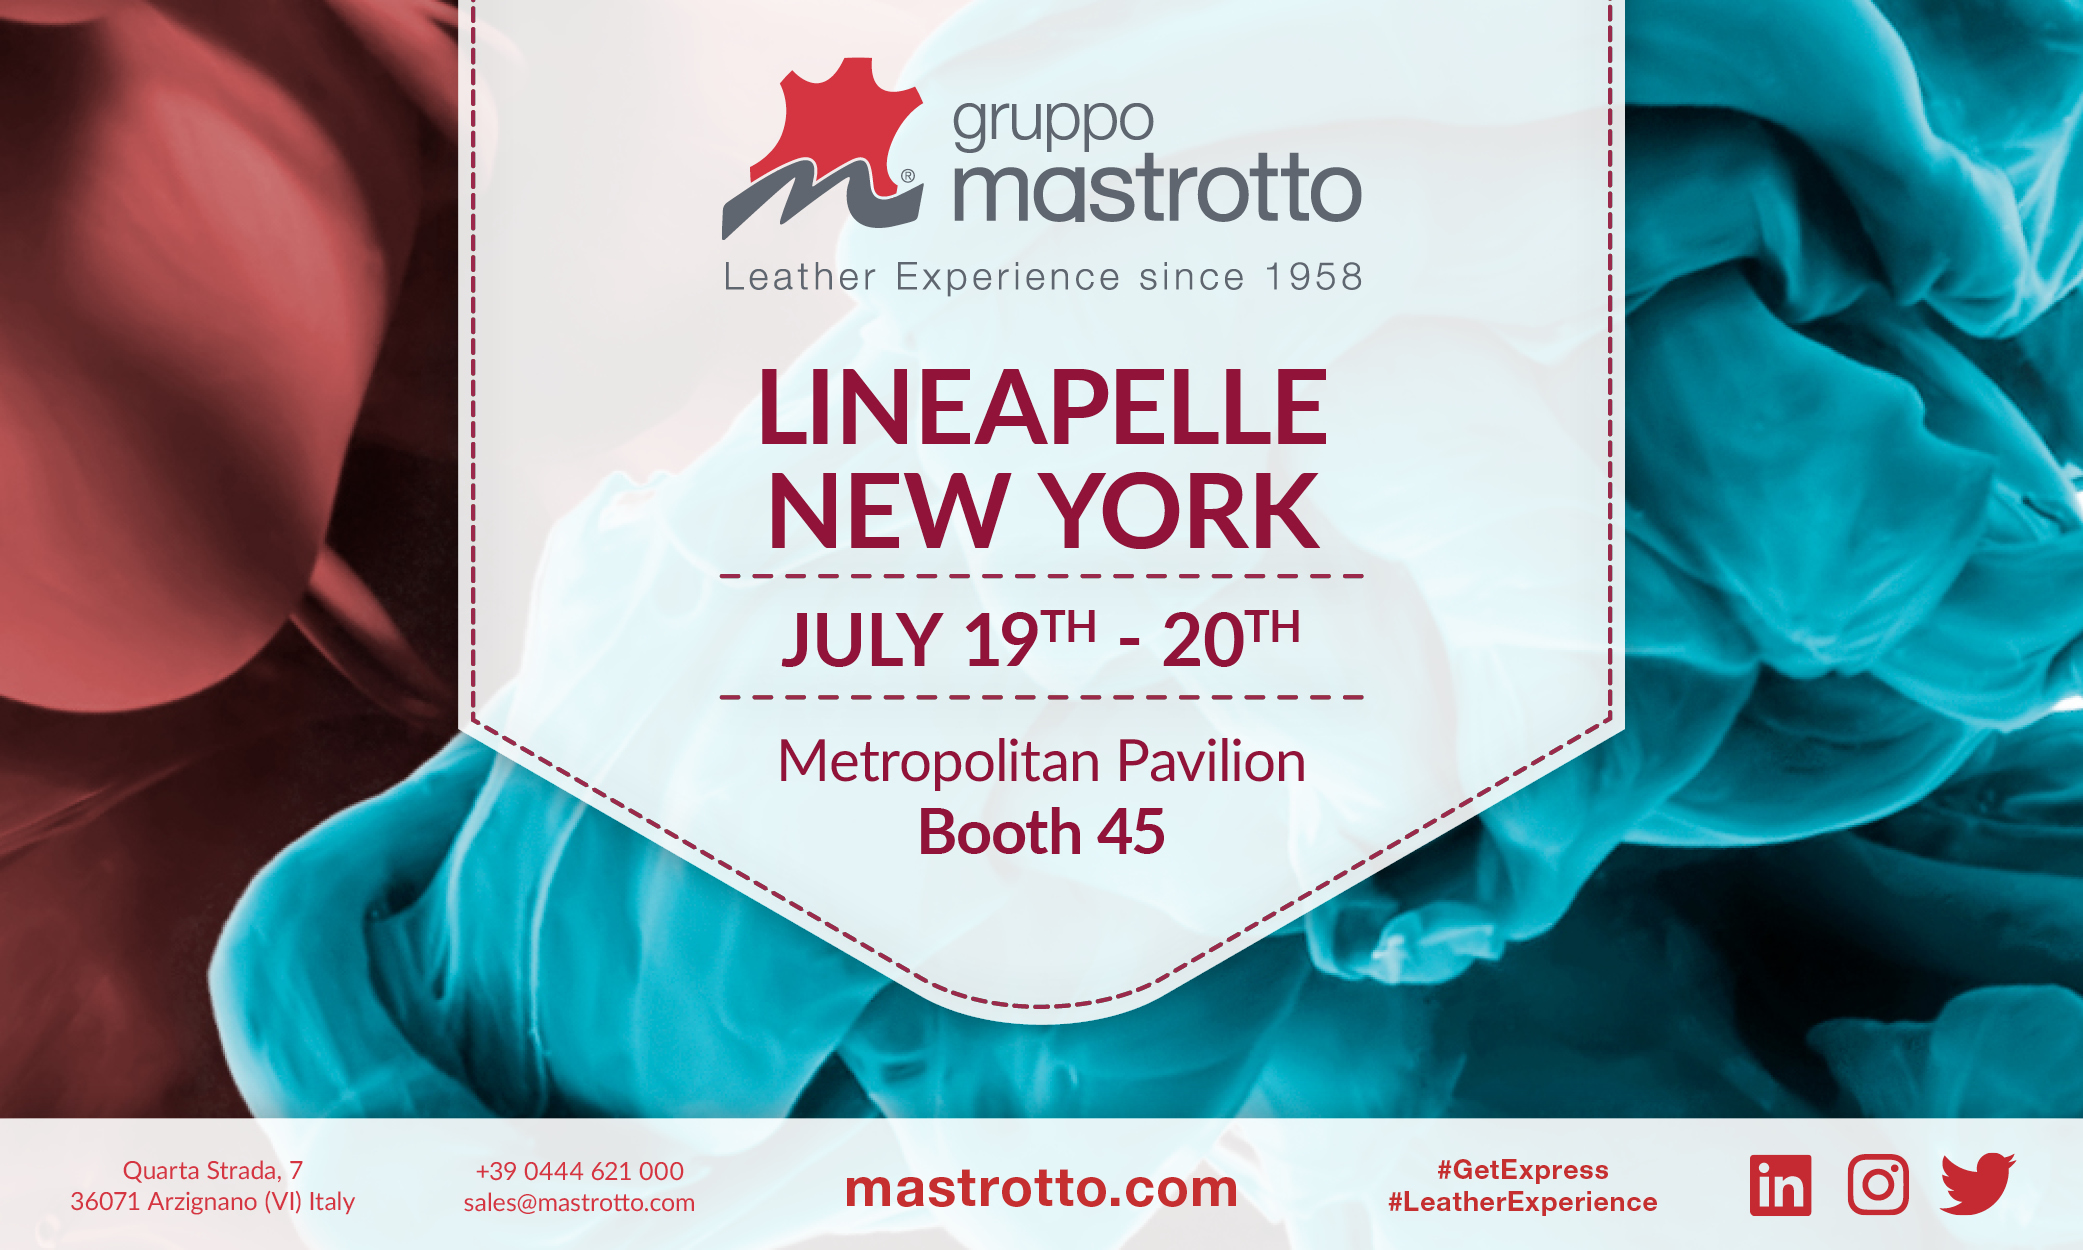 Gruppo Mastrotto at Lineapelle NewYork